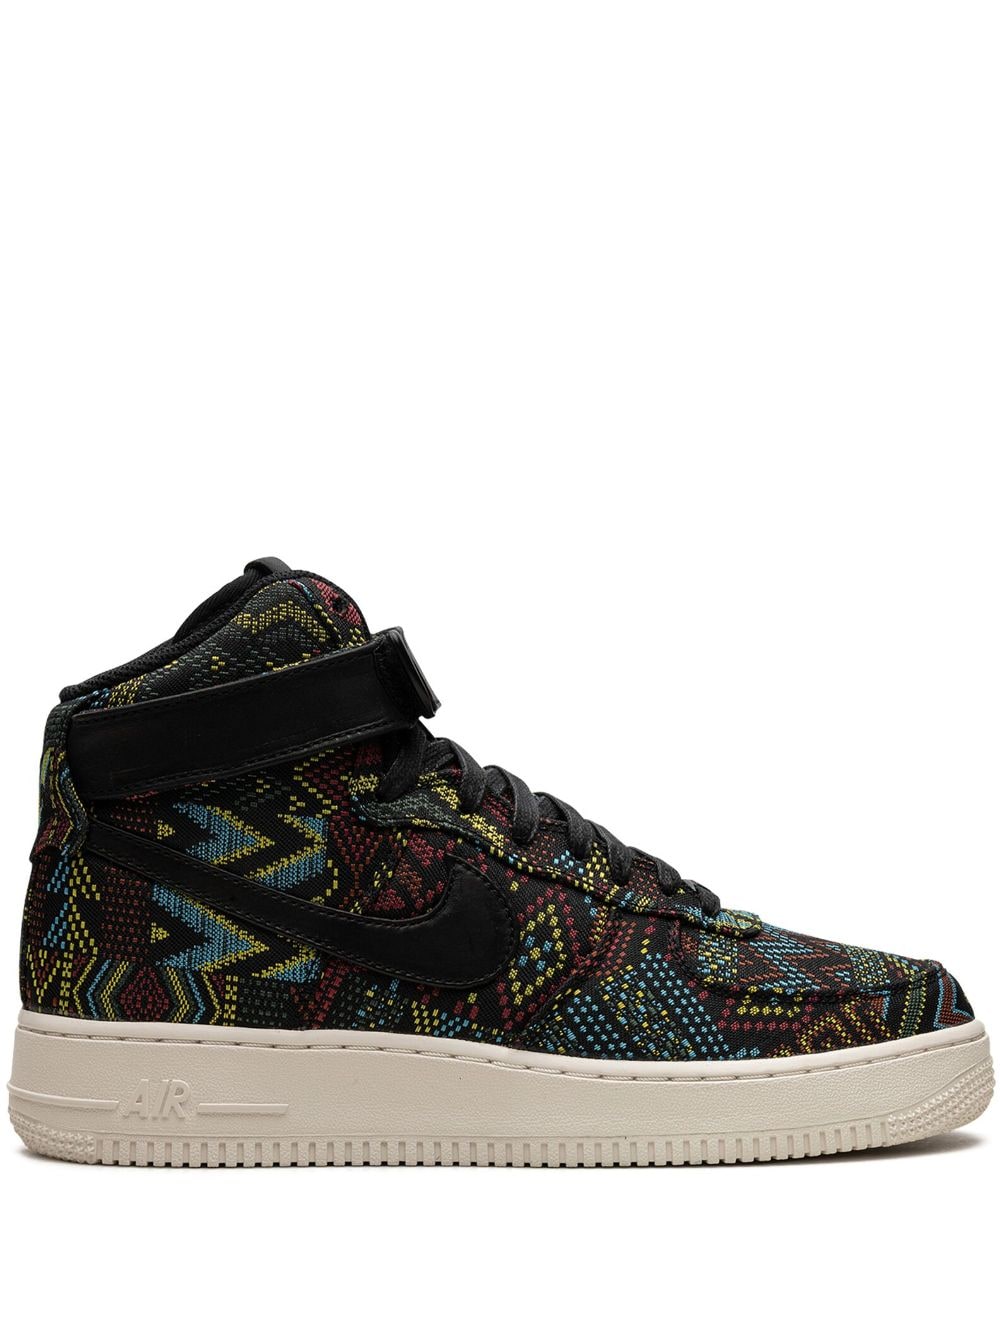 Nike Air Force 1 High "BHM" leather sneakers - Black von Nike